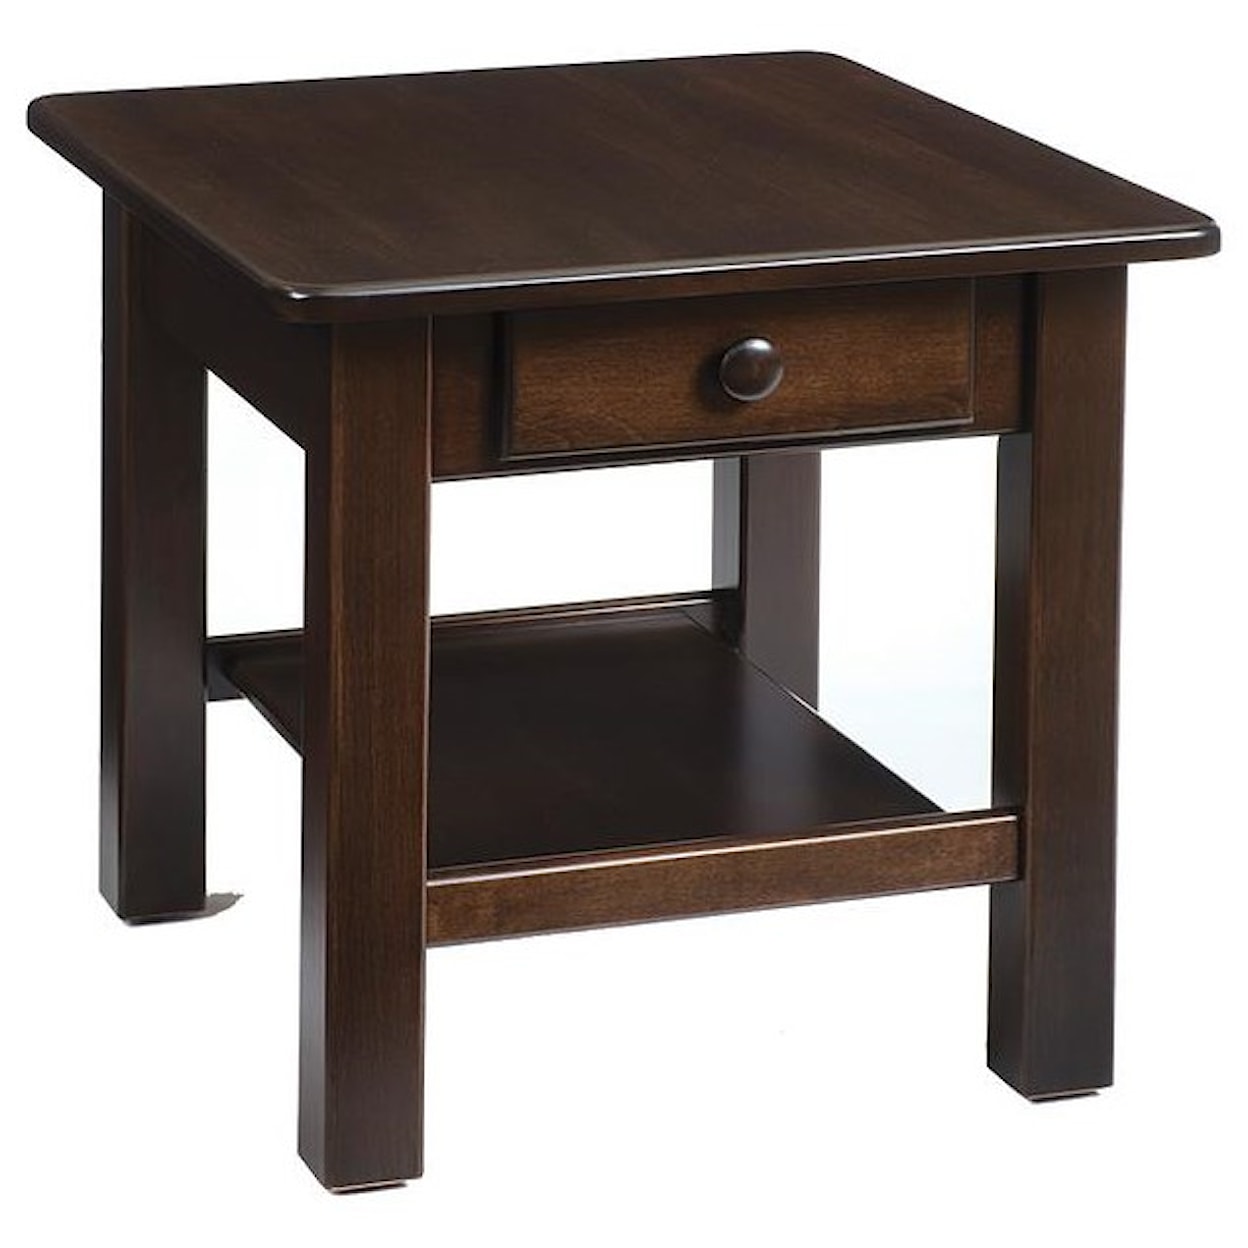 Hopewood Contemporary End Table